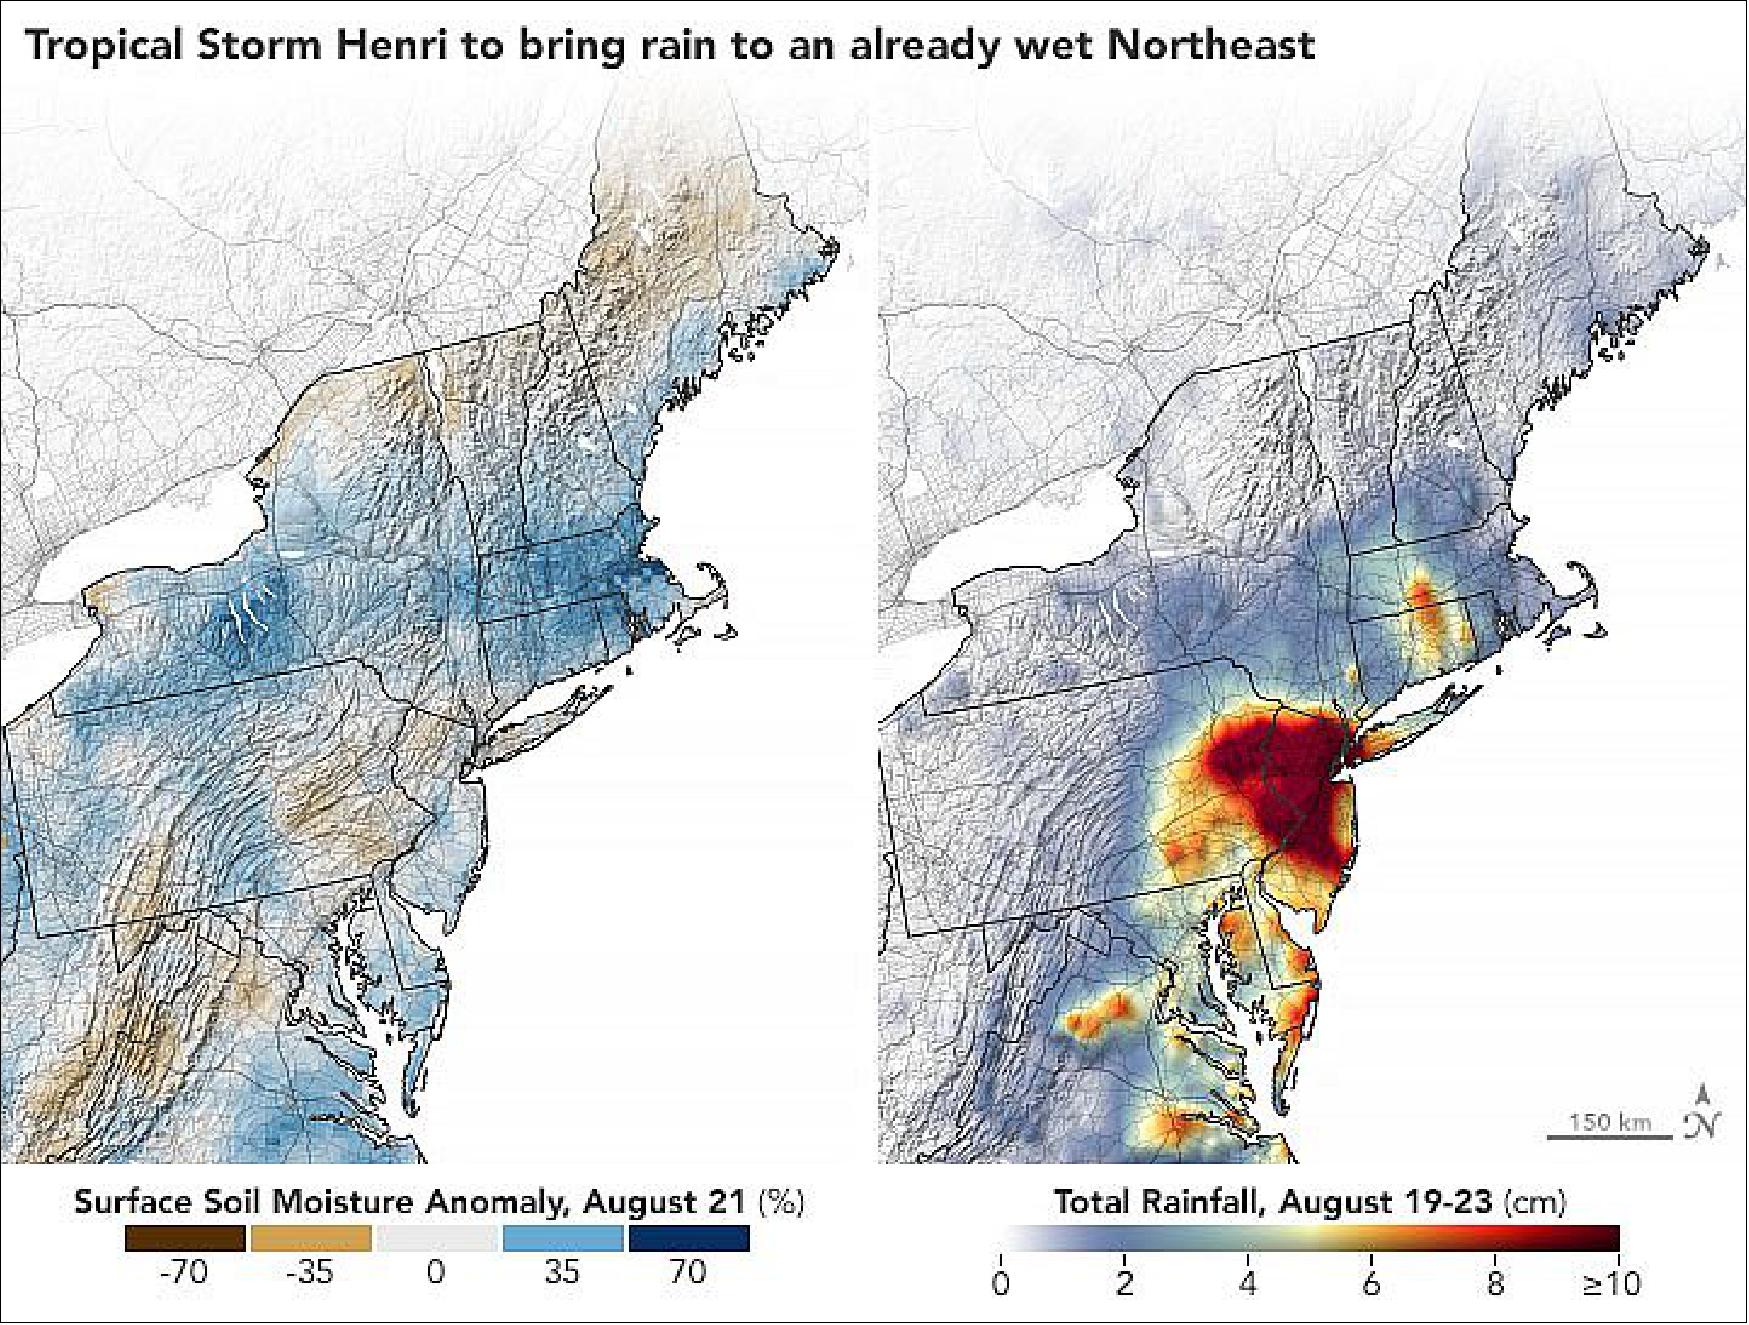 Figure 17: Intense rain fell on Northeast U.S. soils that were already saturated (image credit: NASA Earth Observatory images by Joshua Stevens, using soil moisture data from Crop Condition and Soil Moisture Analytics (Crop-CASMA) and IMERG data from the Global Precipitation Mission (GPM) at NASA/GSFC. Story by Michael Carlowicz)